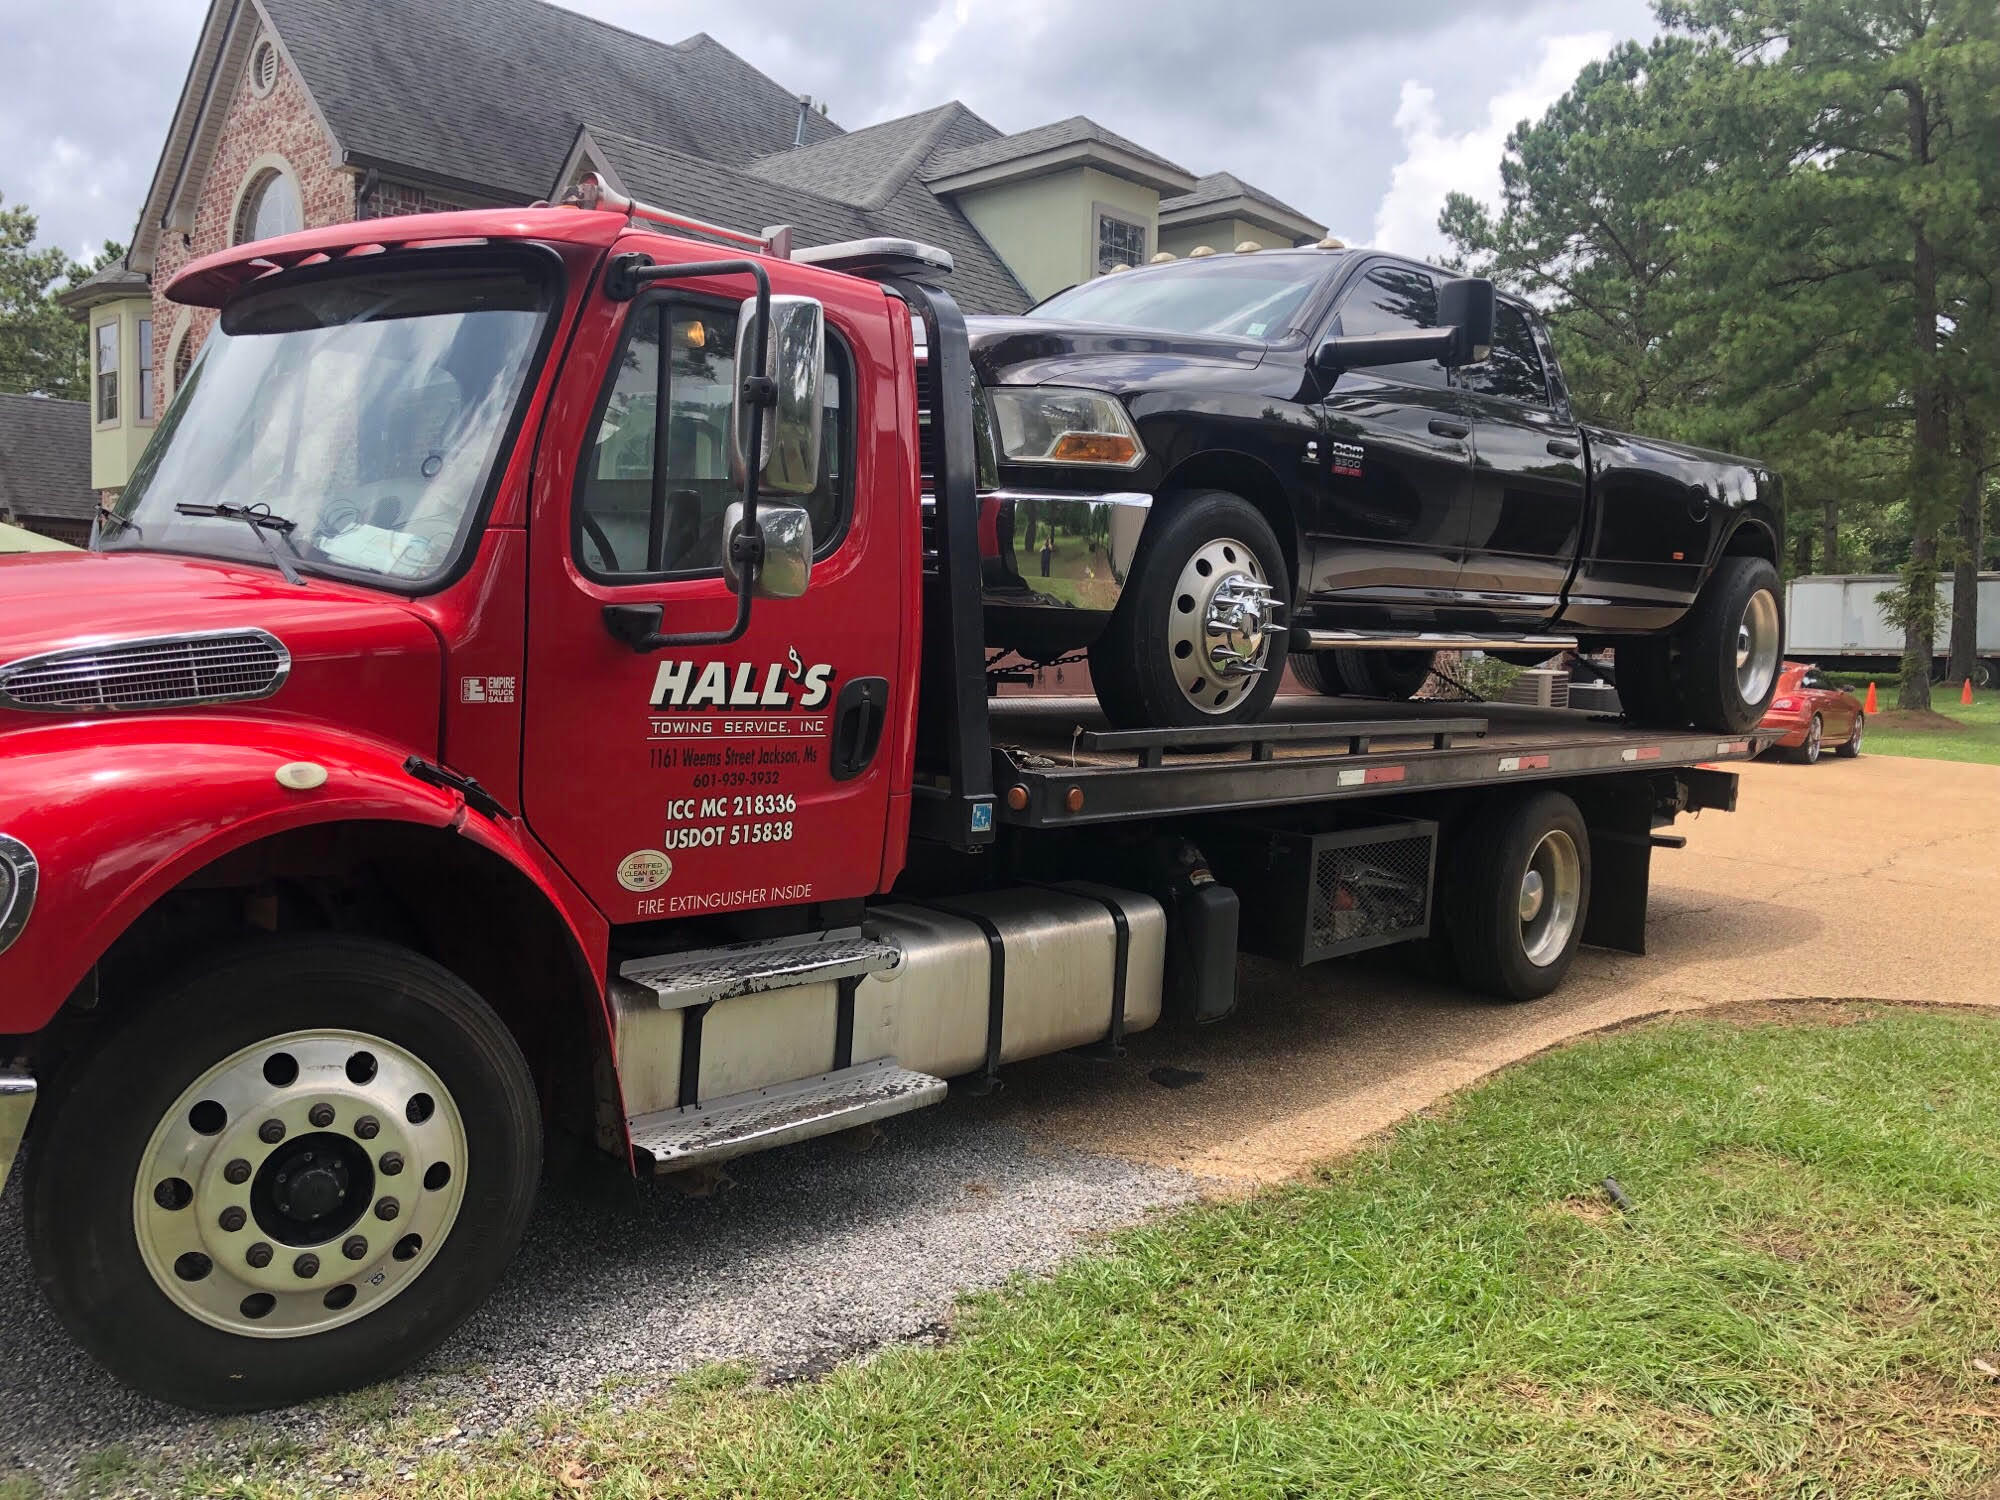 Hall's Towing Service Photo